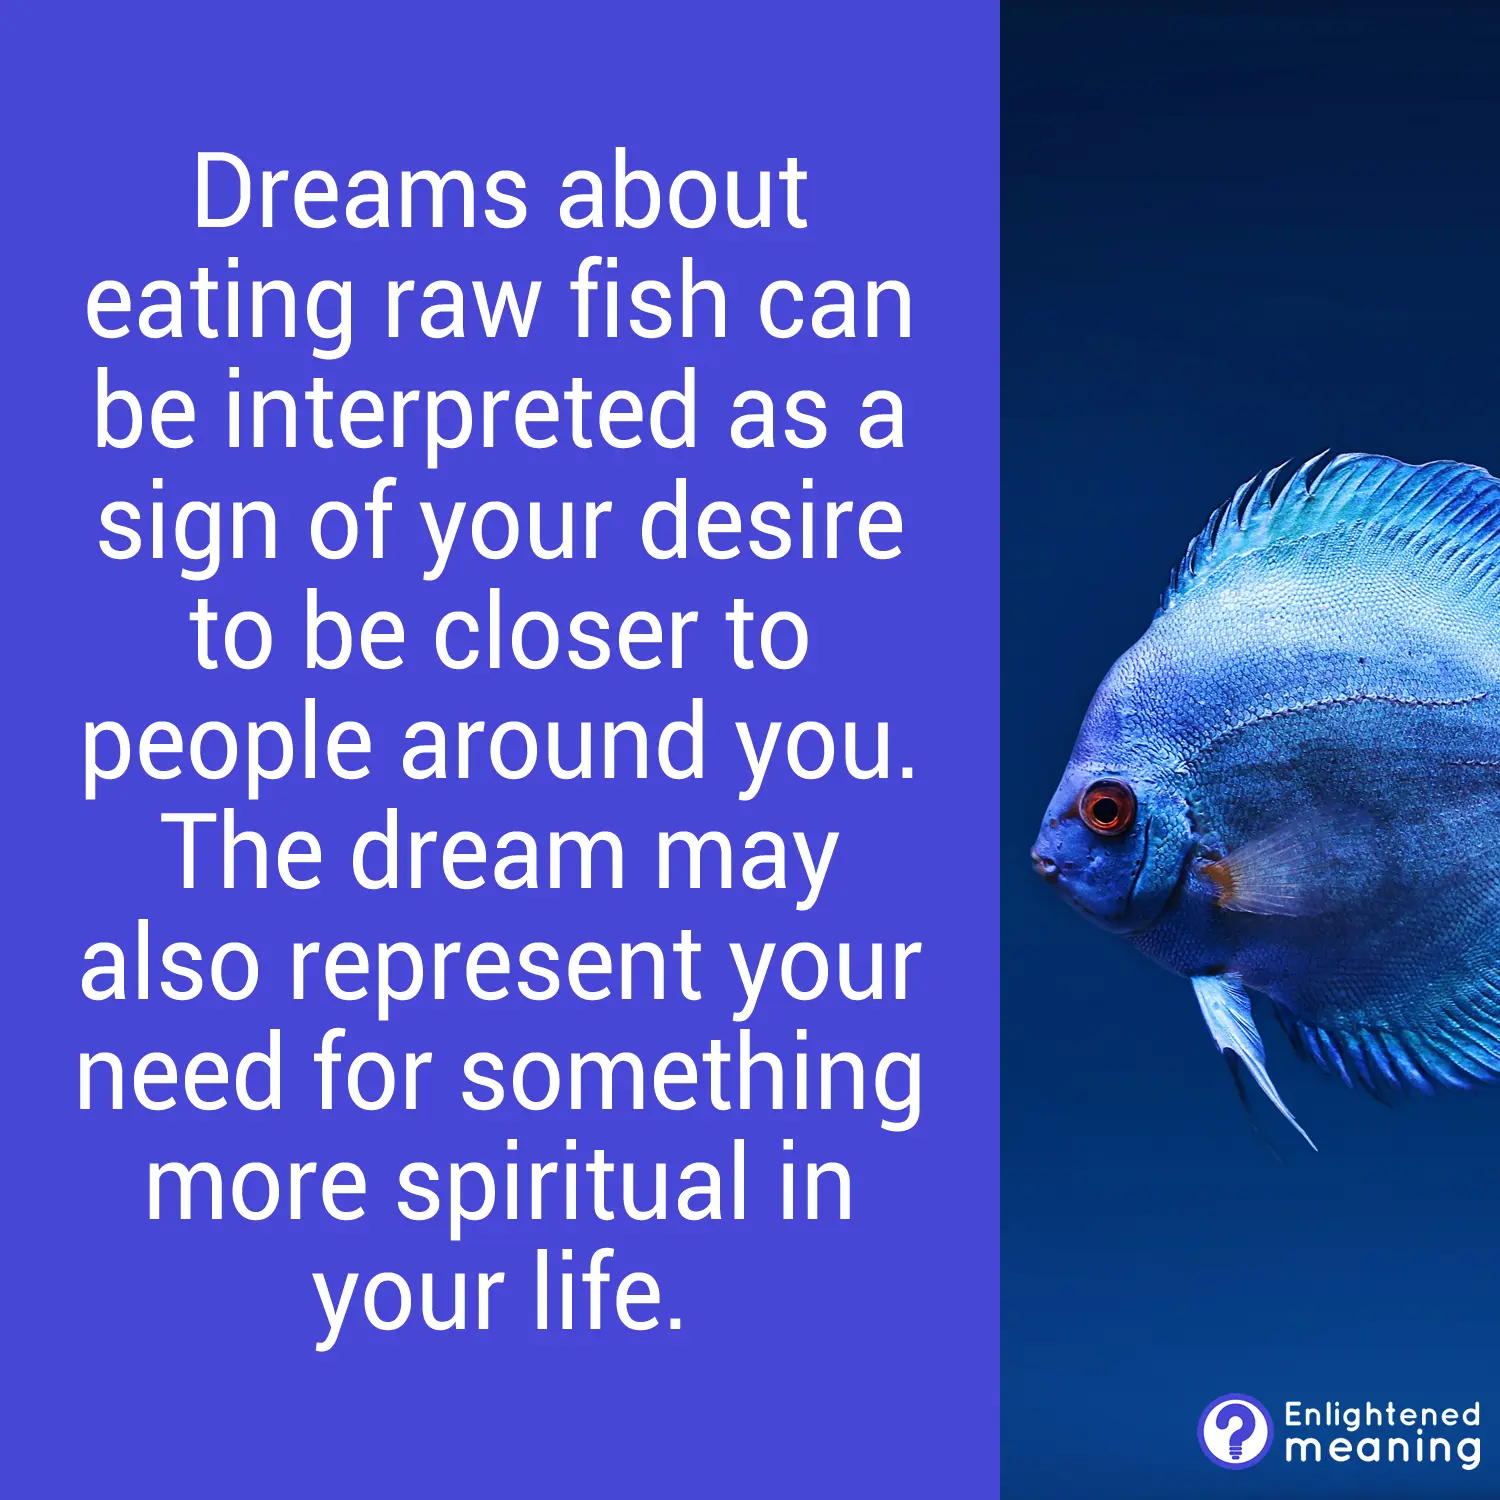 Biblical meaning of fish in dream